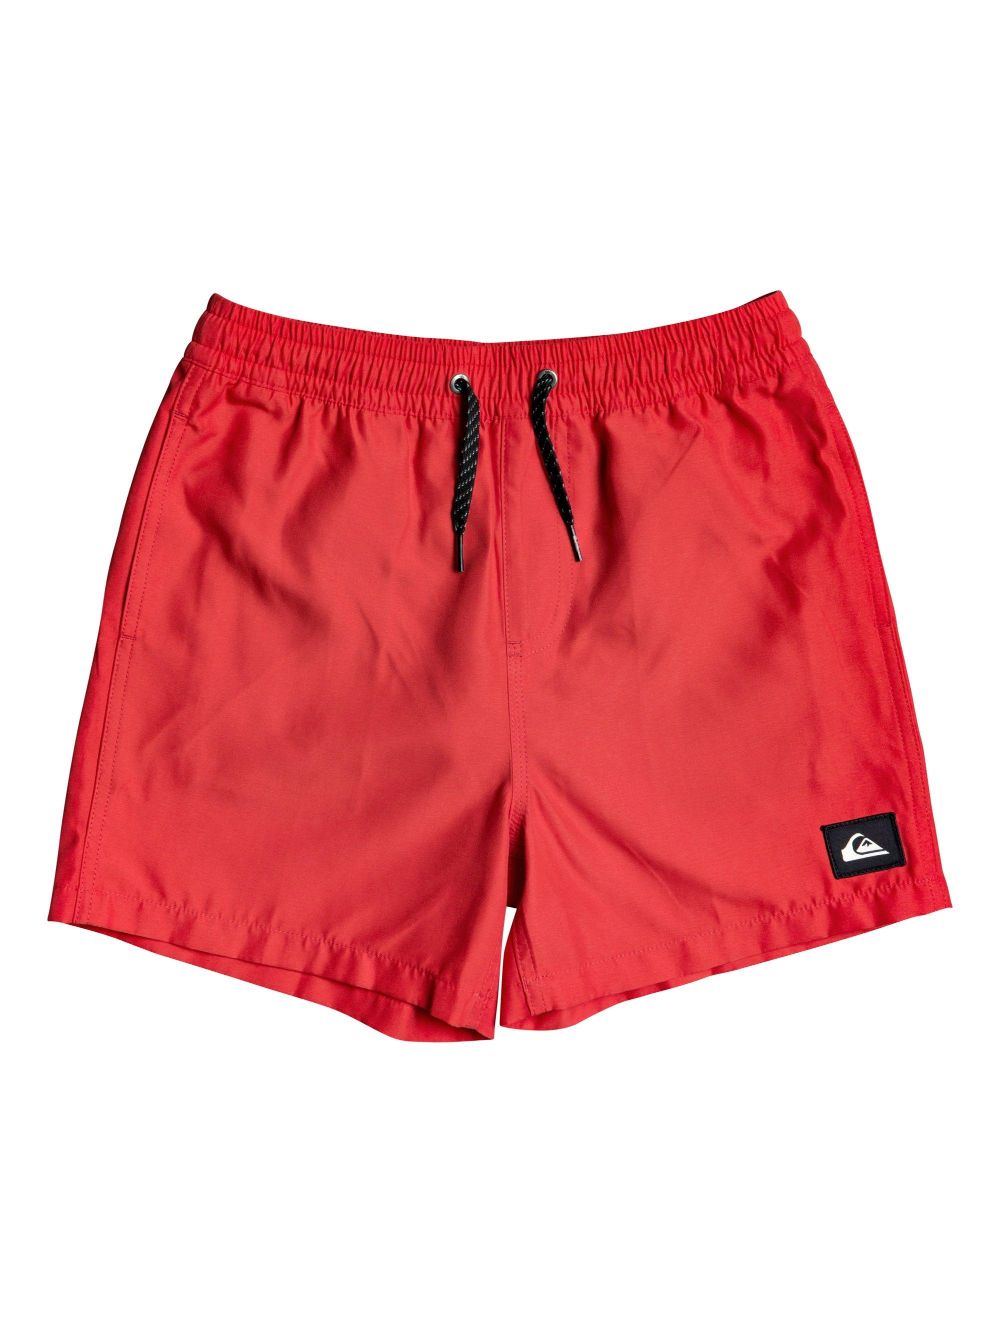 BAADOR EVERYDAY VOLLEY YOUTH 13 POLYESTER HIGH RISK RED